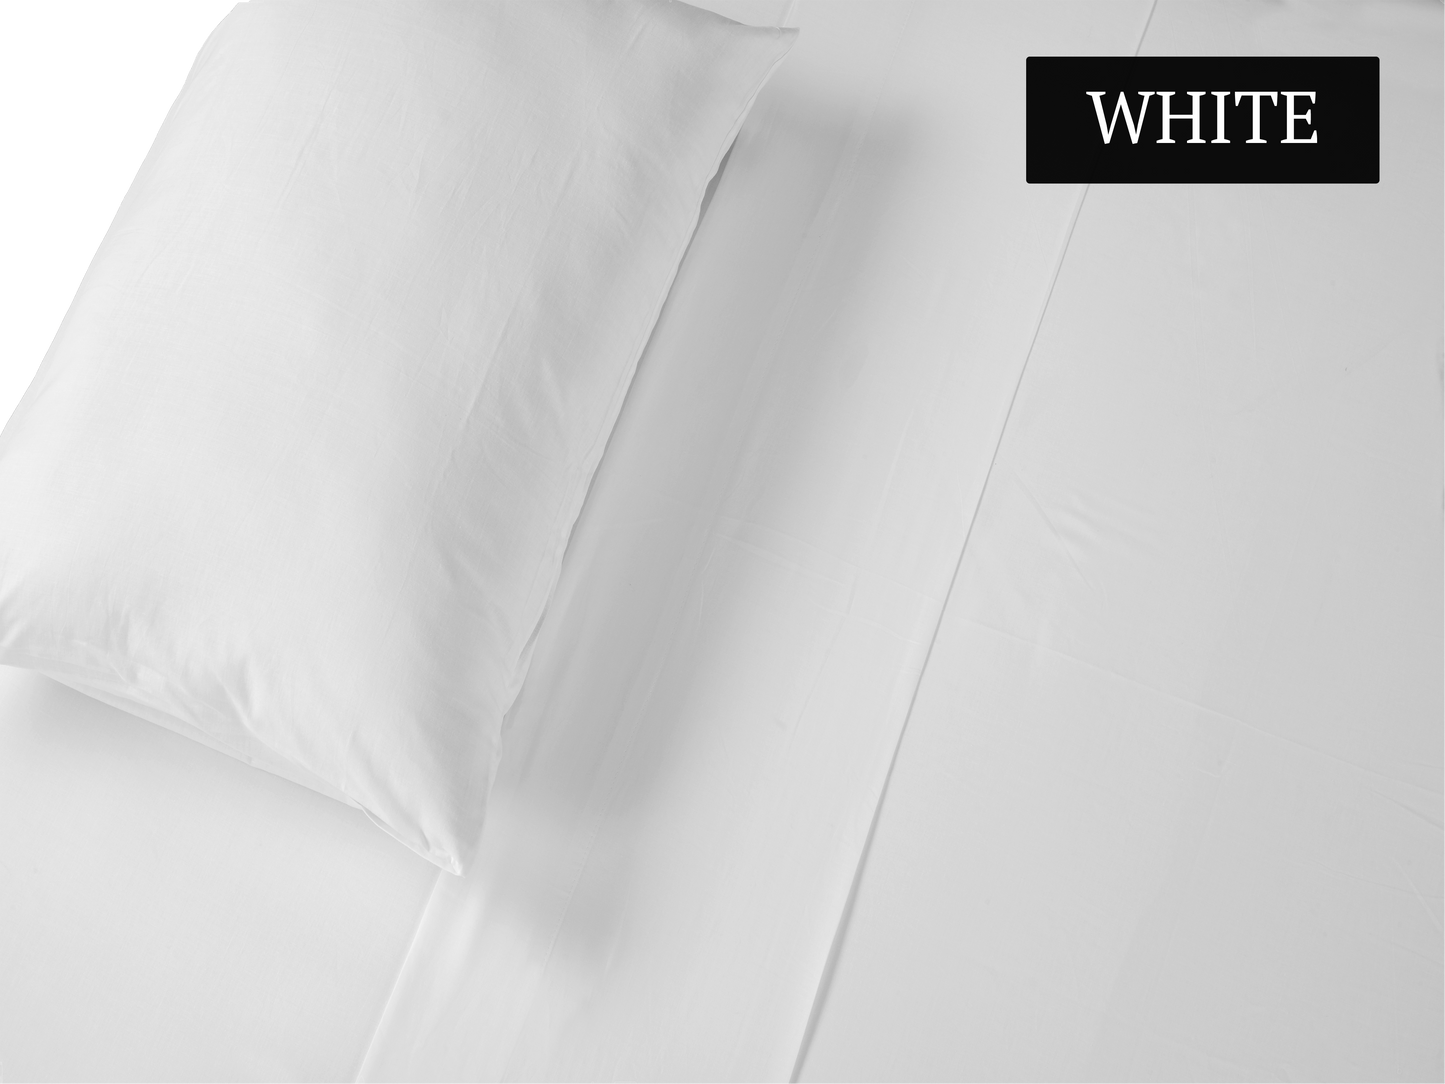 Fitted Sheet Only - 44" x 80" x 6" (White)